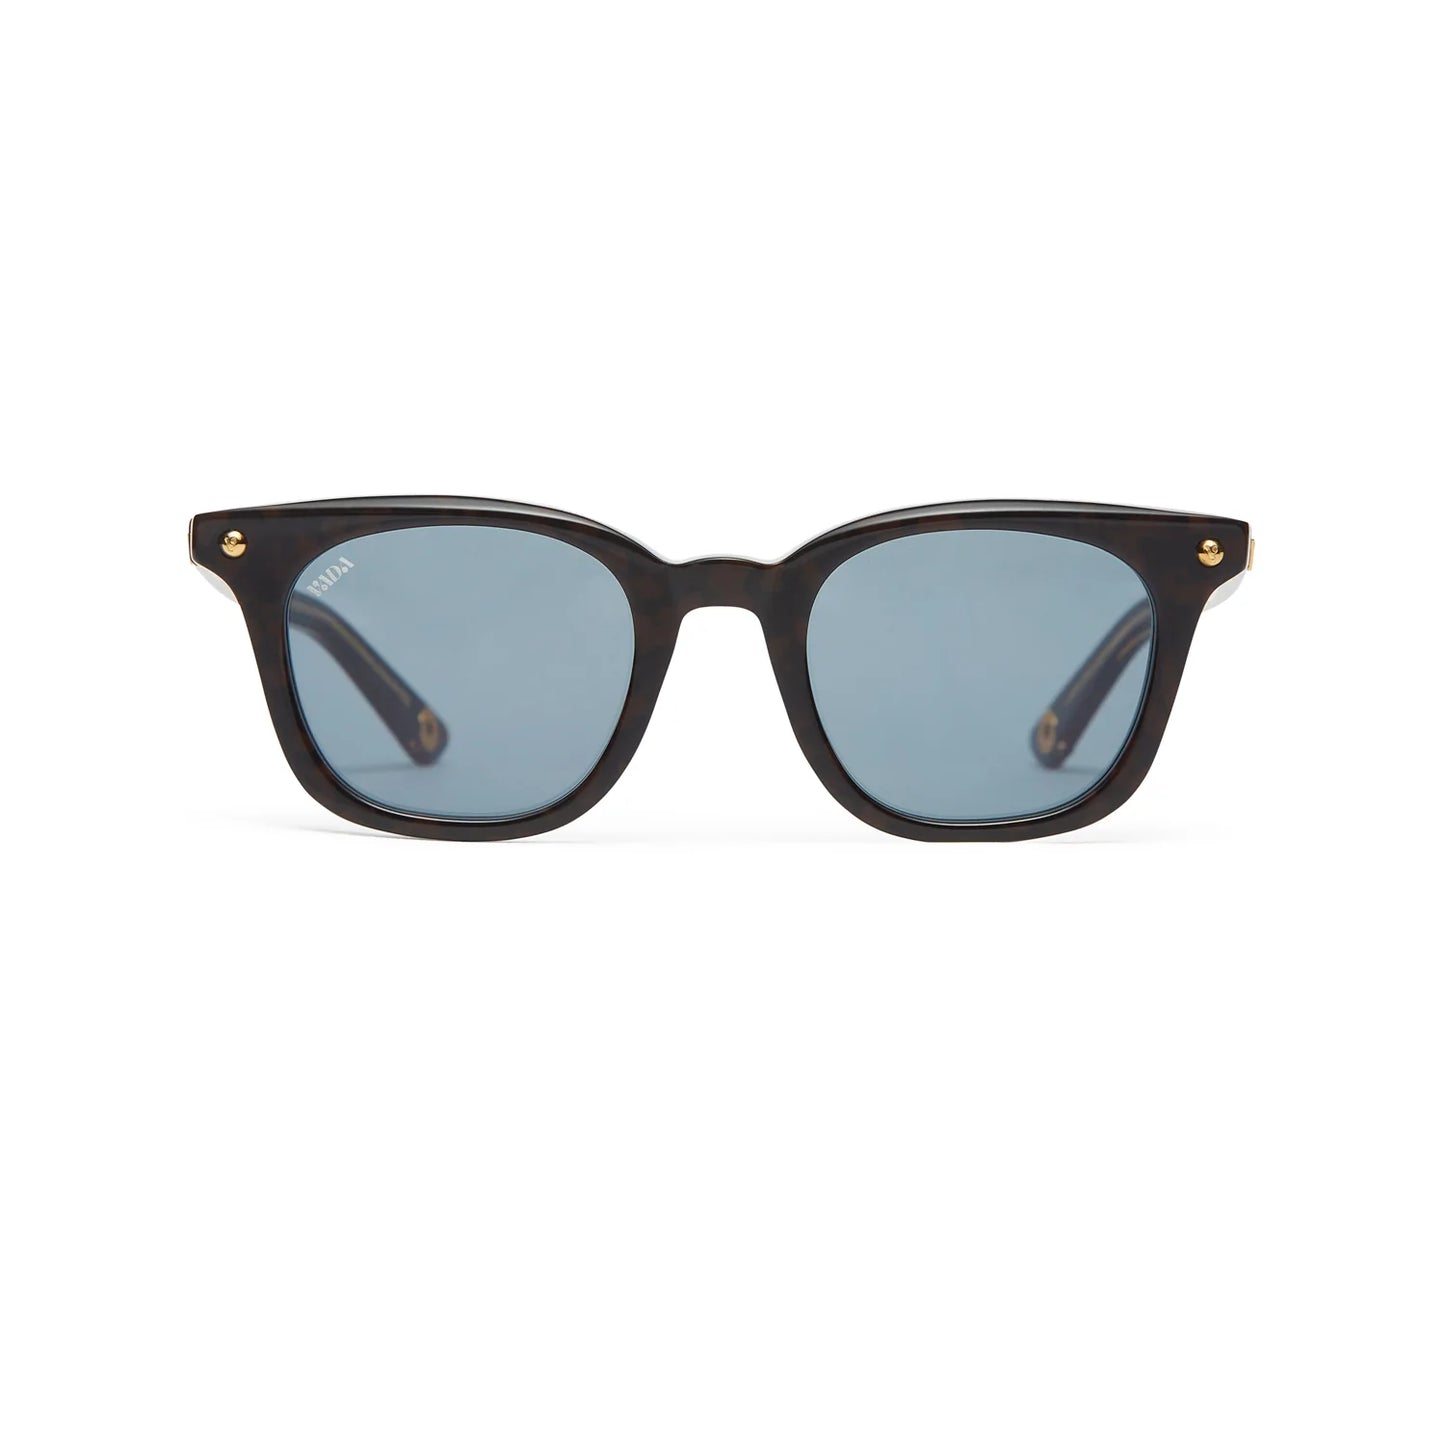 TRANCE Sunglasses by VADA